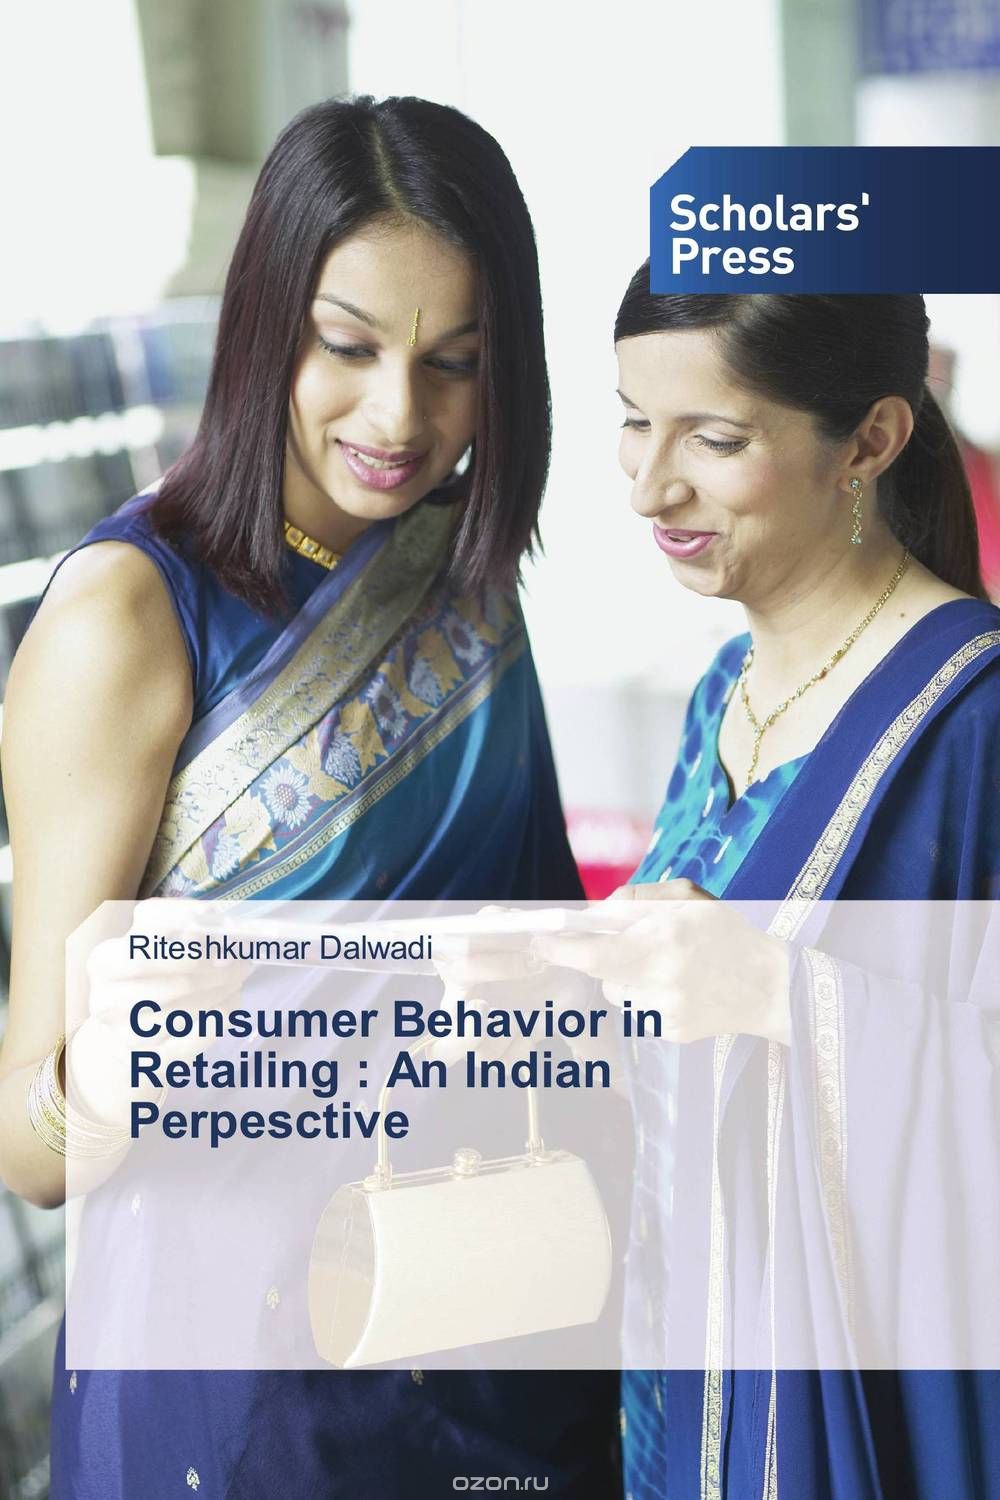 Consumer Behavior in Retailing : An Indian Perpesctive